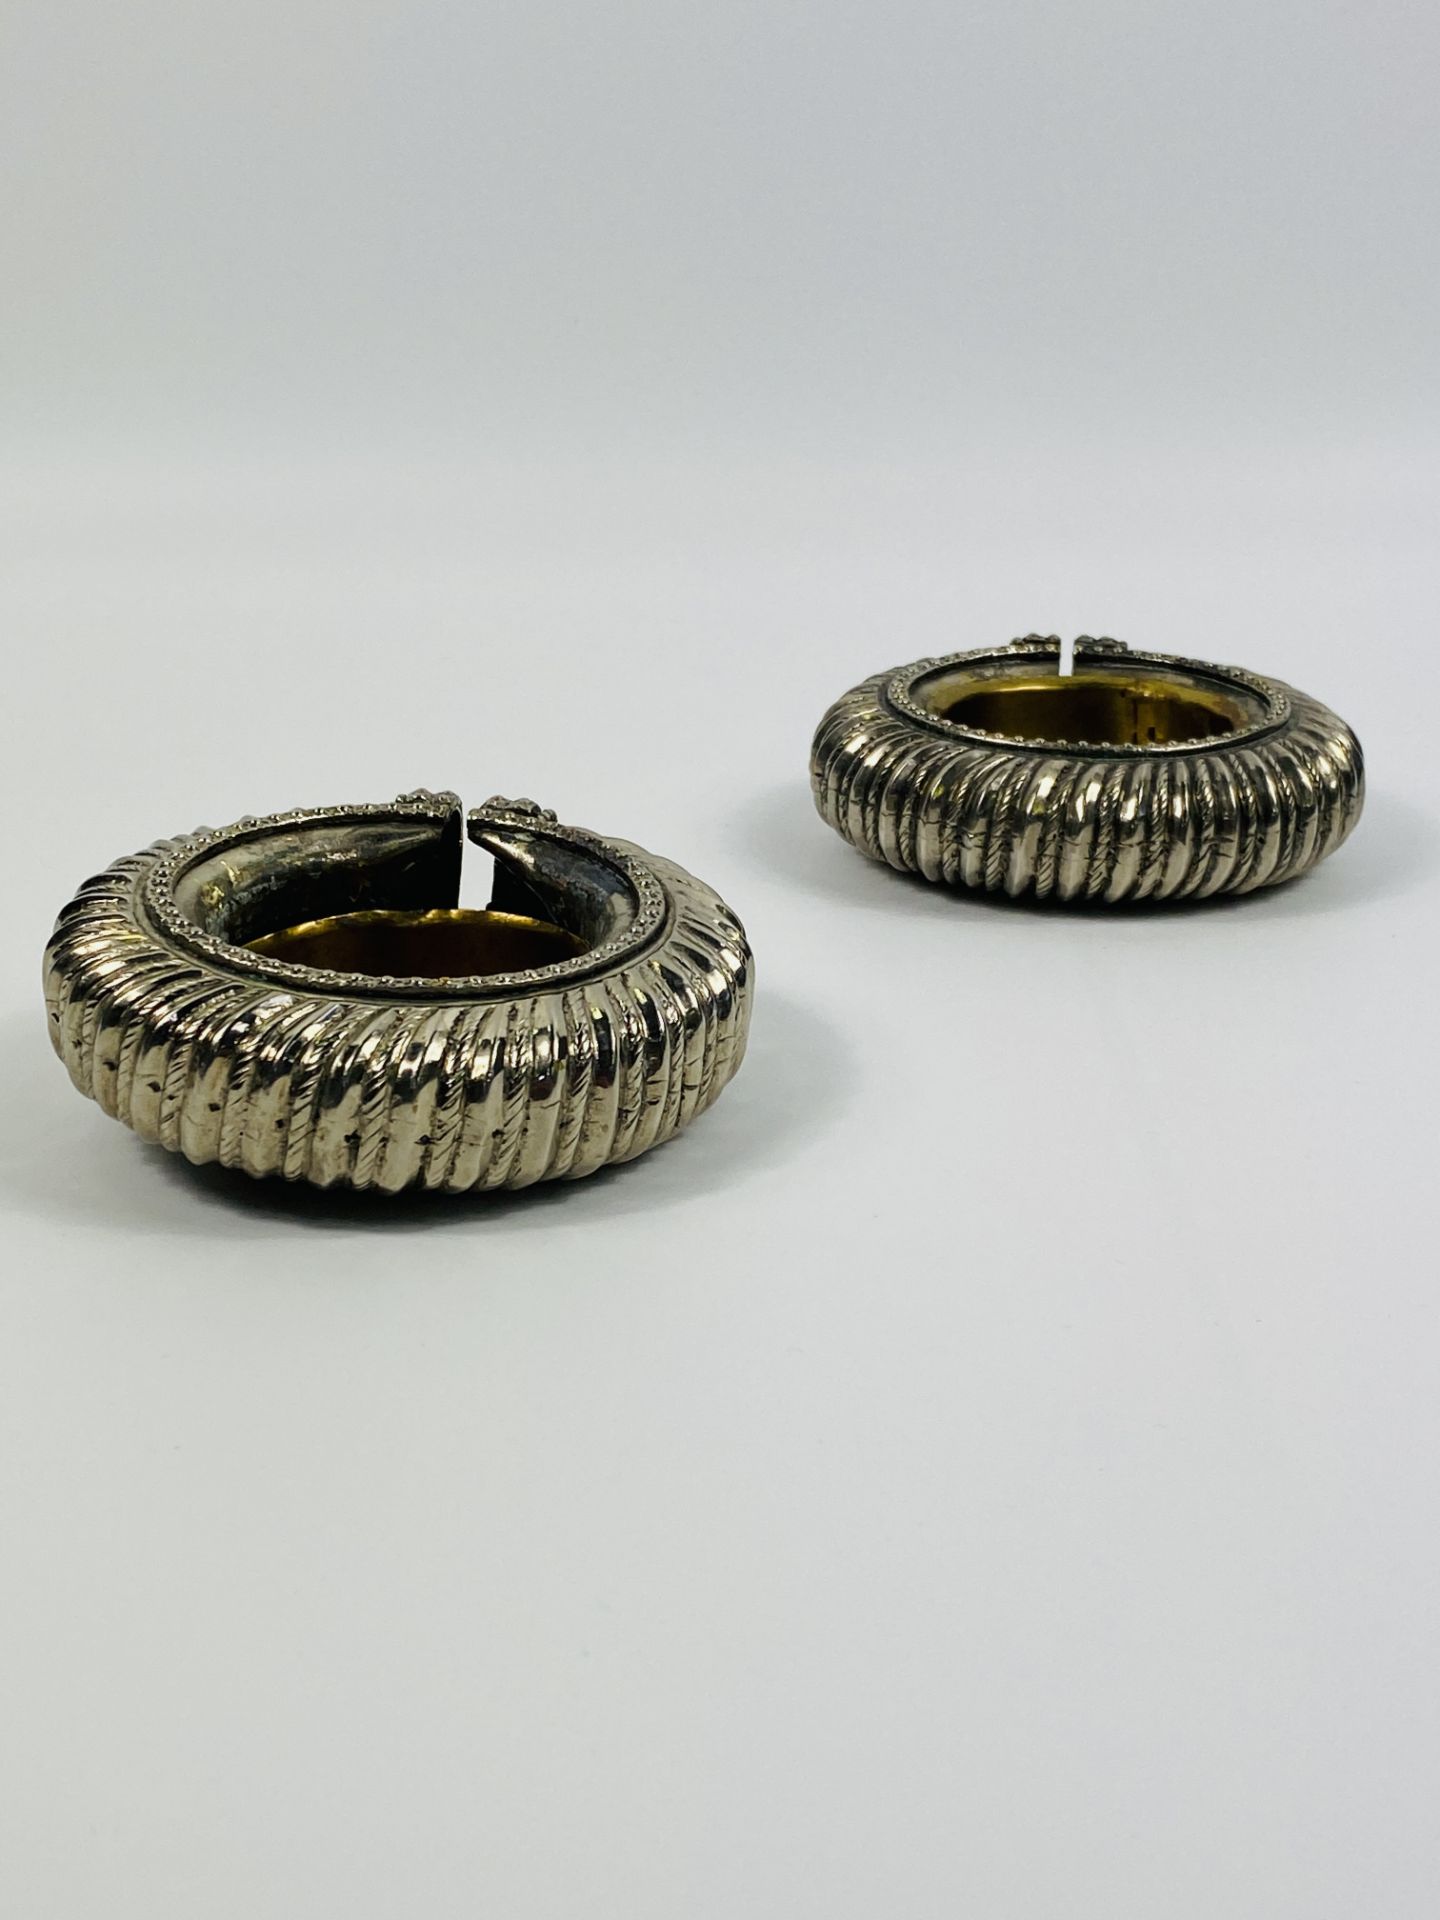 Pair of white metal ankle bangles with brass inserts - Image 5 of 7